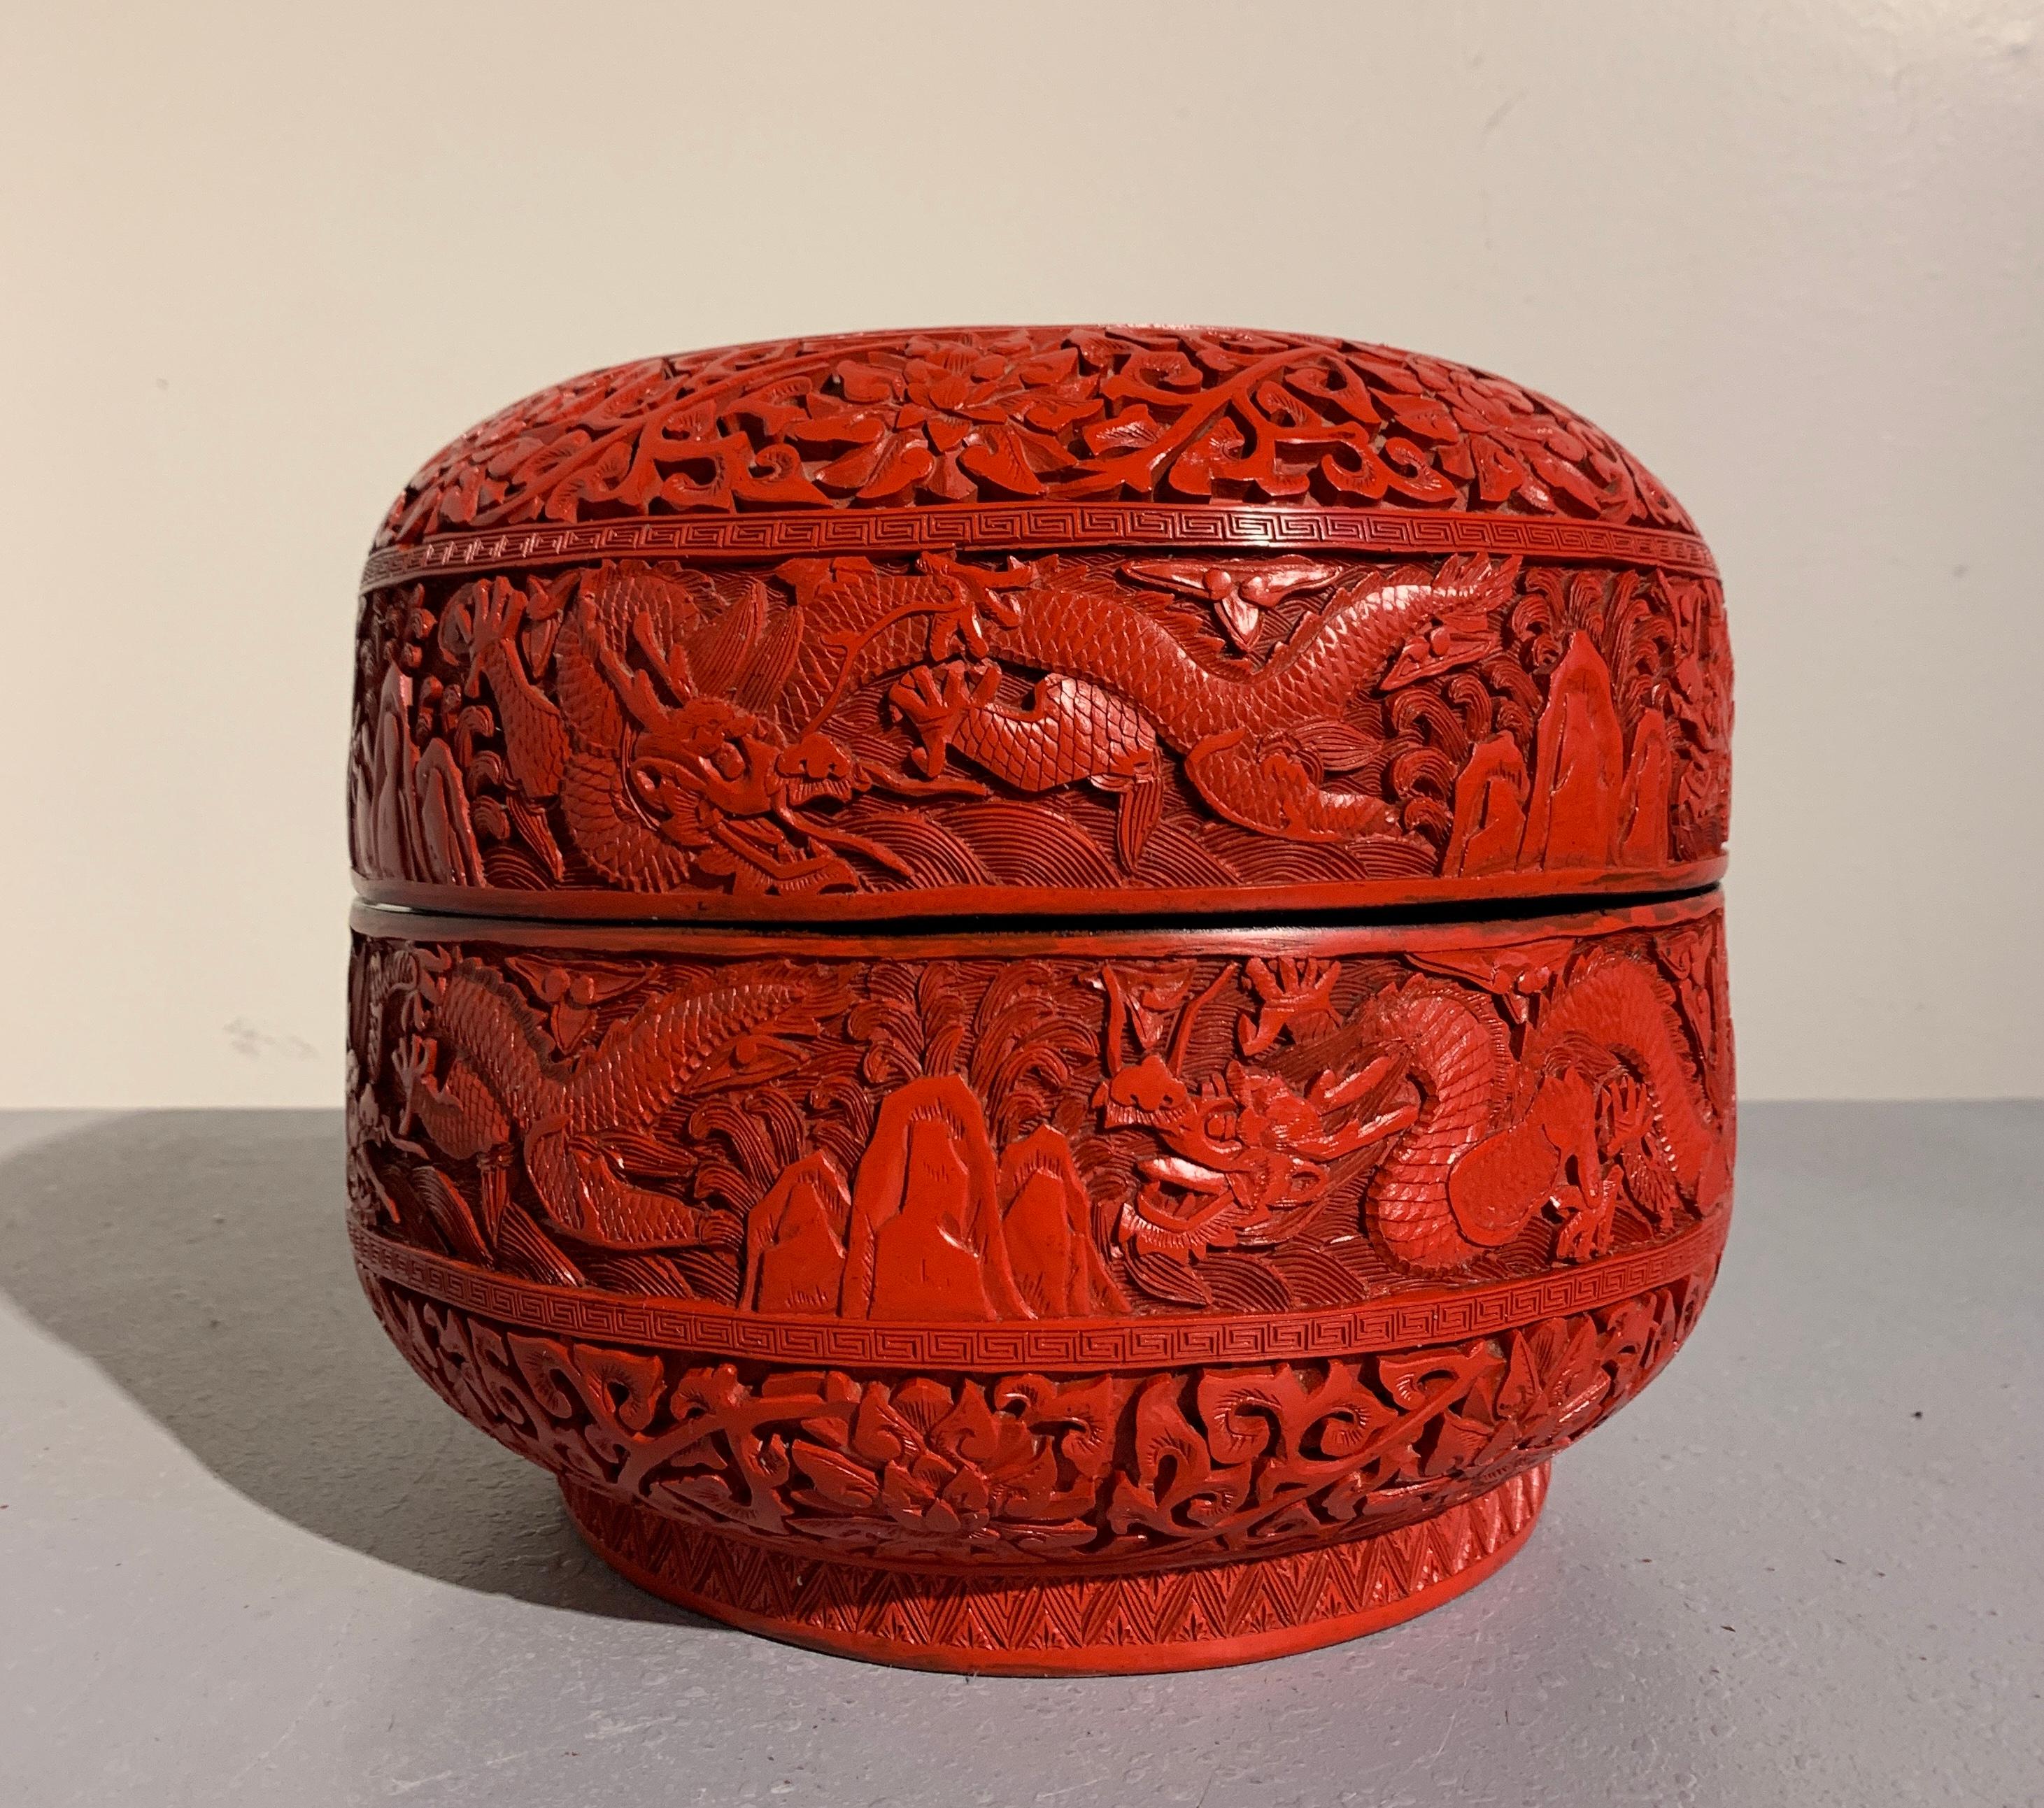 A large Chinese carved red cinnabar lacquer nine dragon cake box, late Republic period, circa 1940.
Exuberantly carved in deep relief with a design nine five clawed dragons dancing above rocky peaks amongst the waves and clouds, the tall, round box